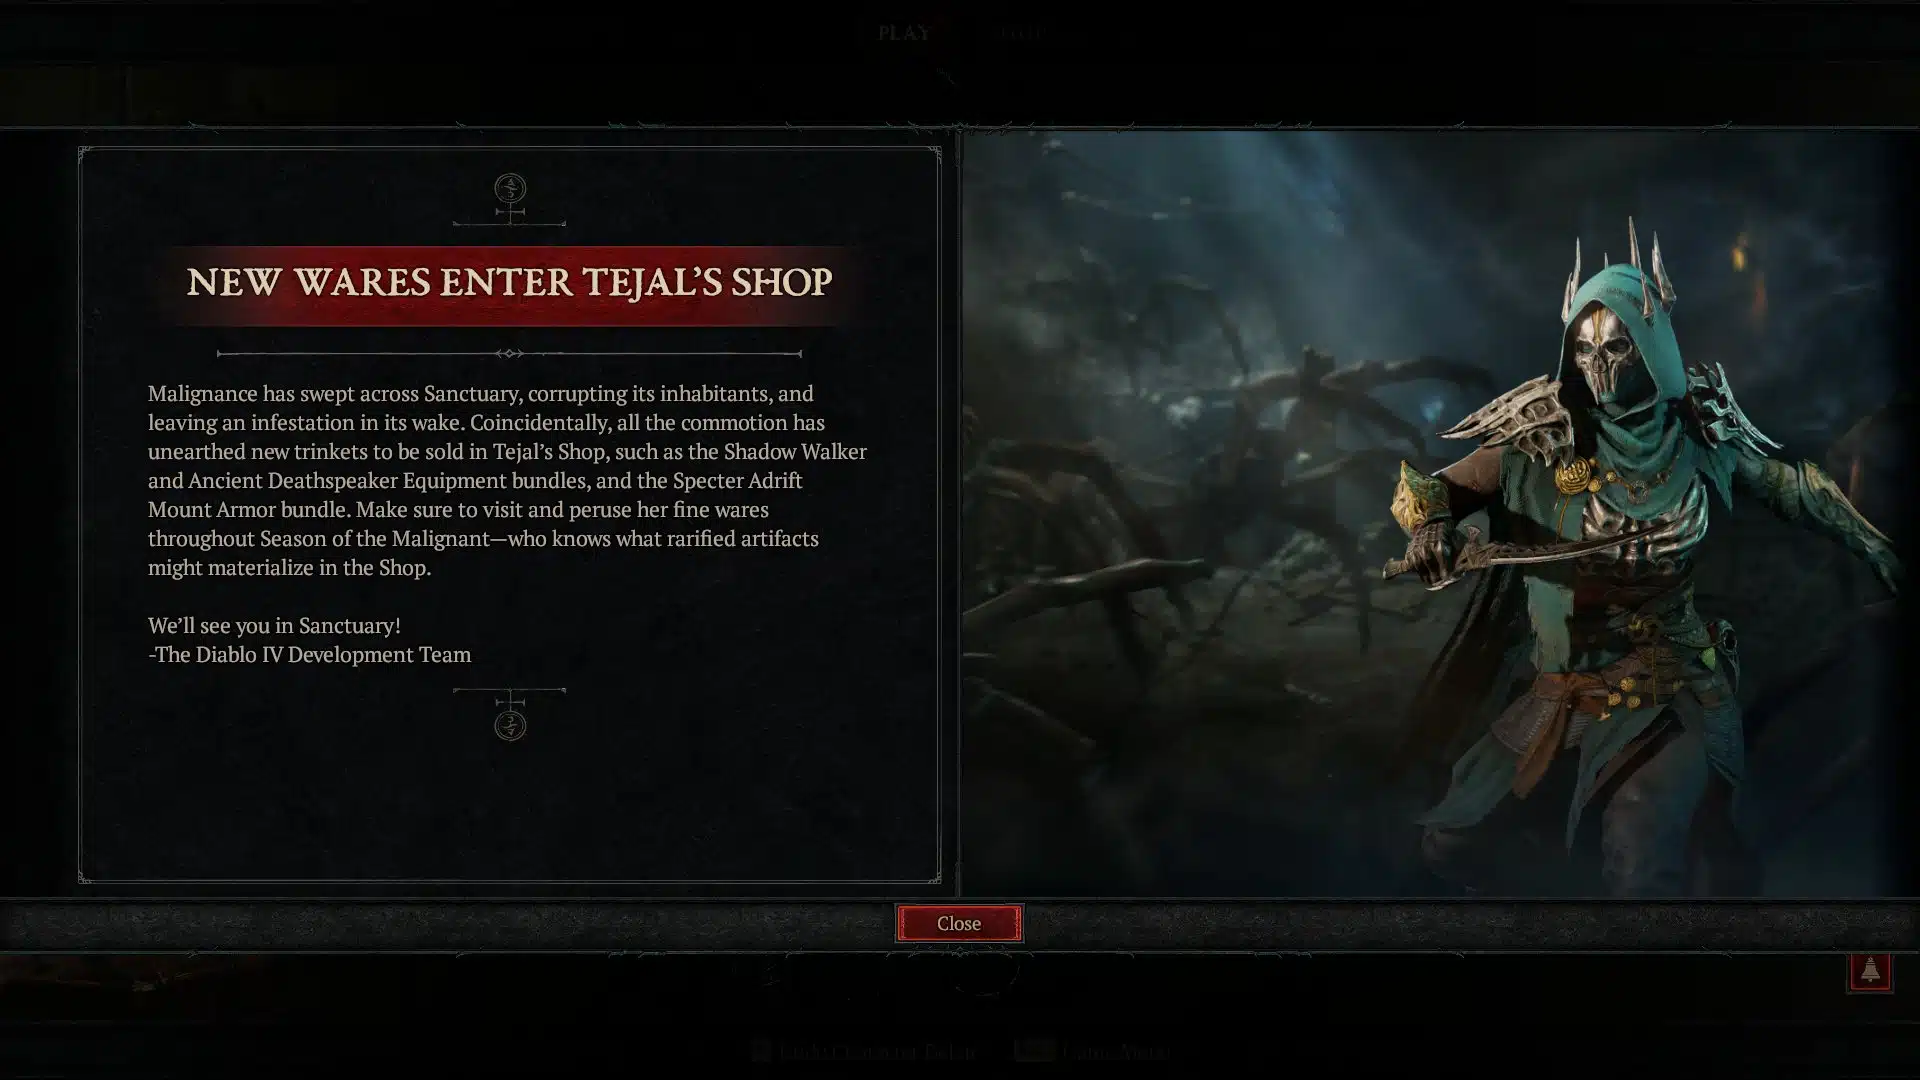 Diablo 4 Community Outraged Over In-Game Shop Ads